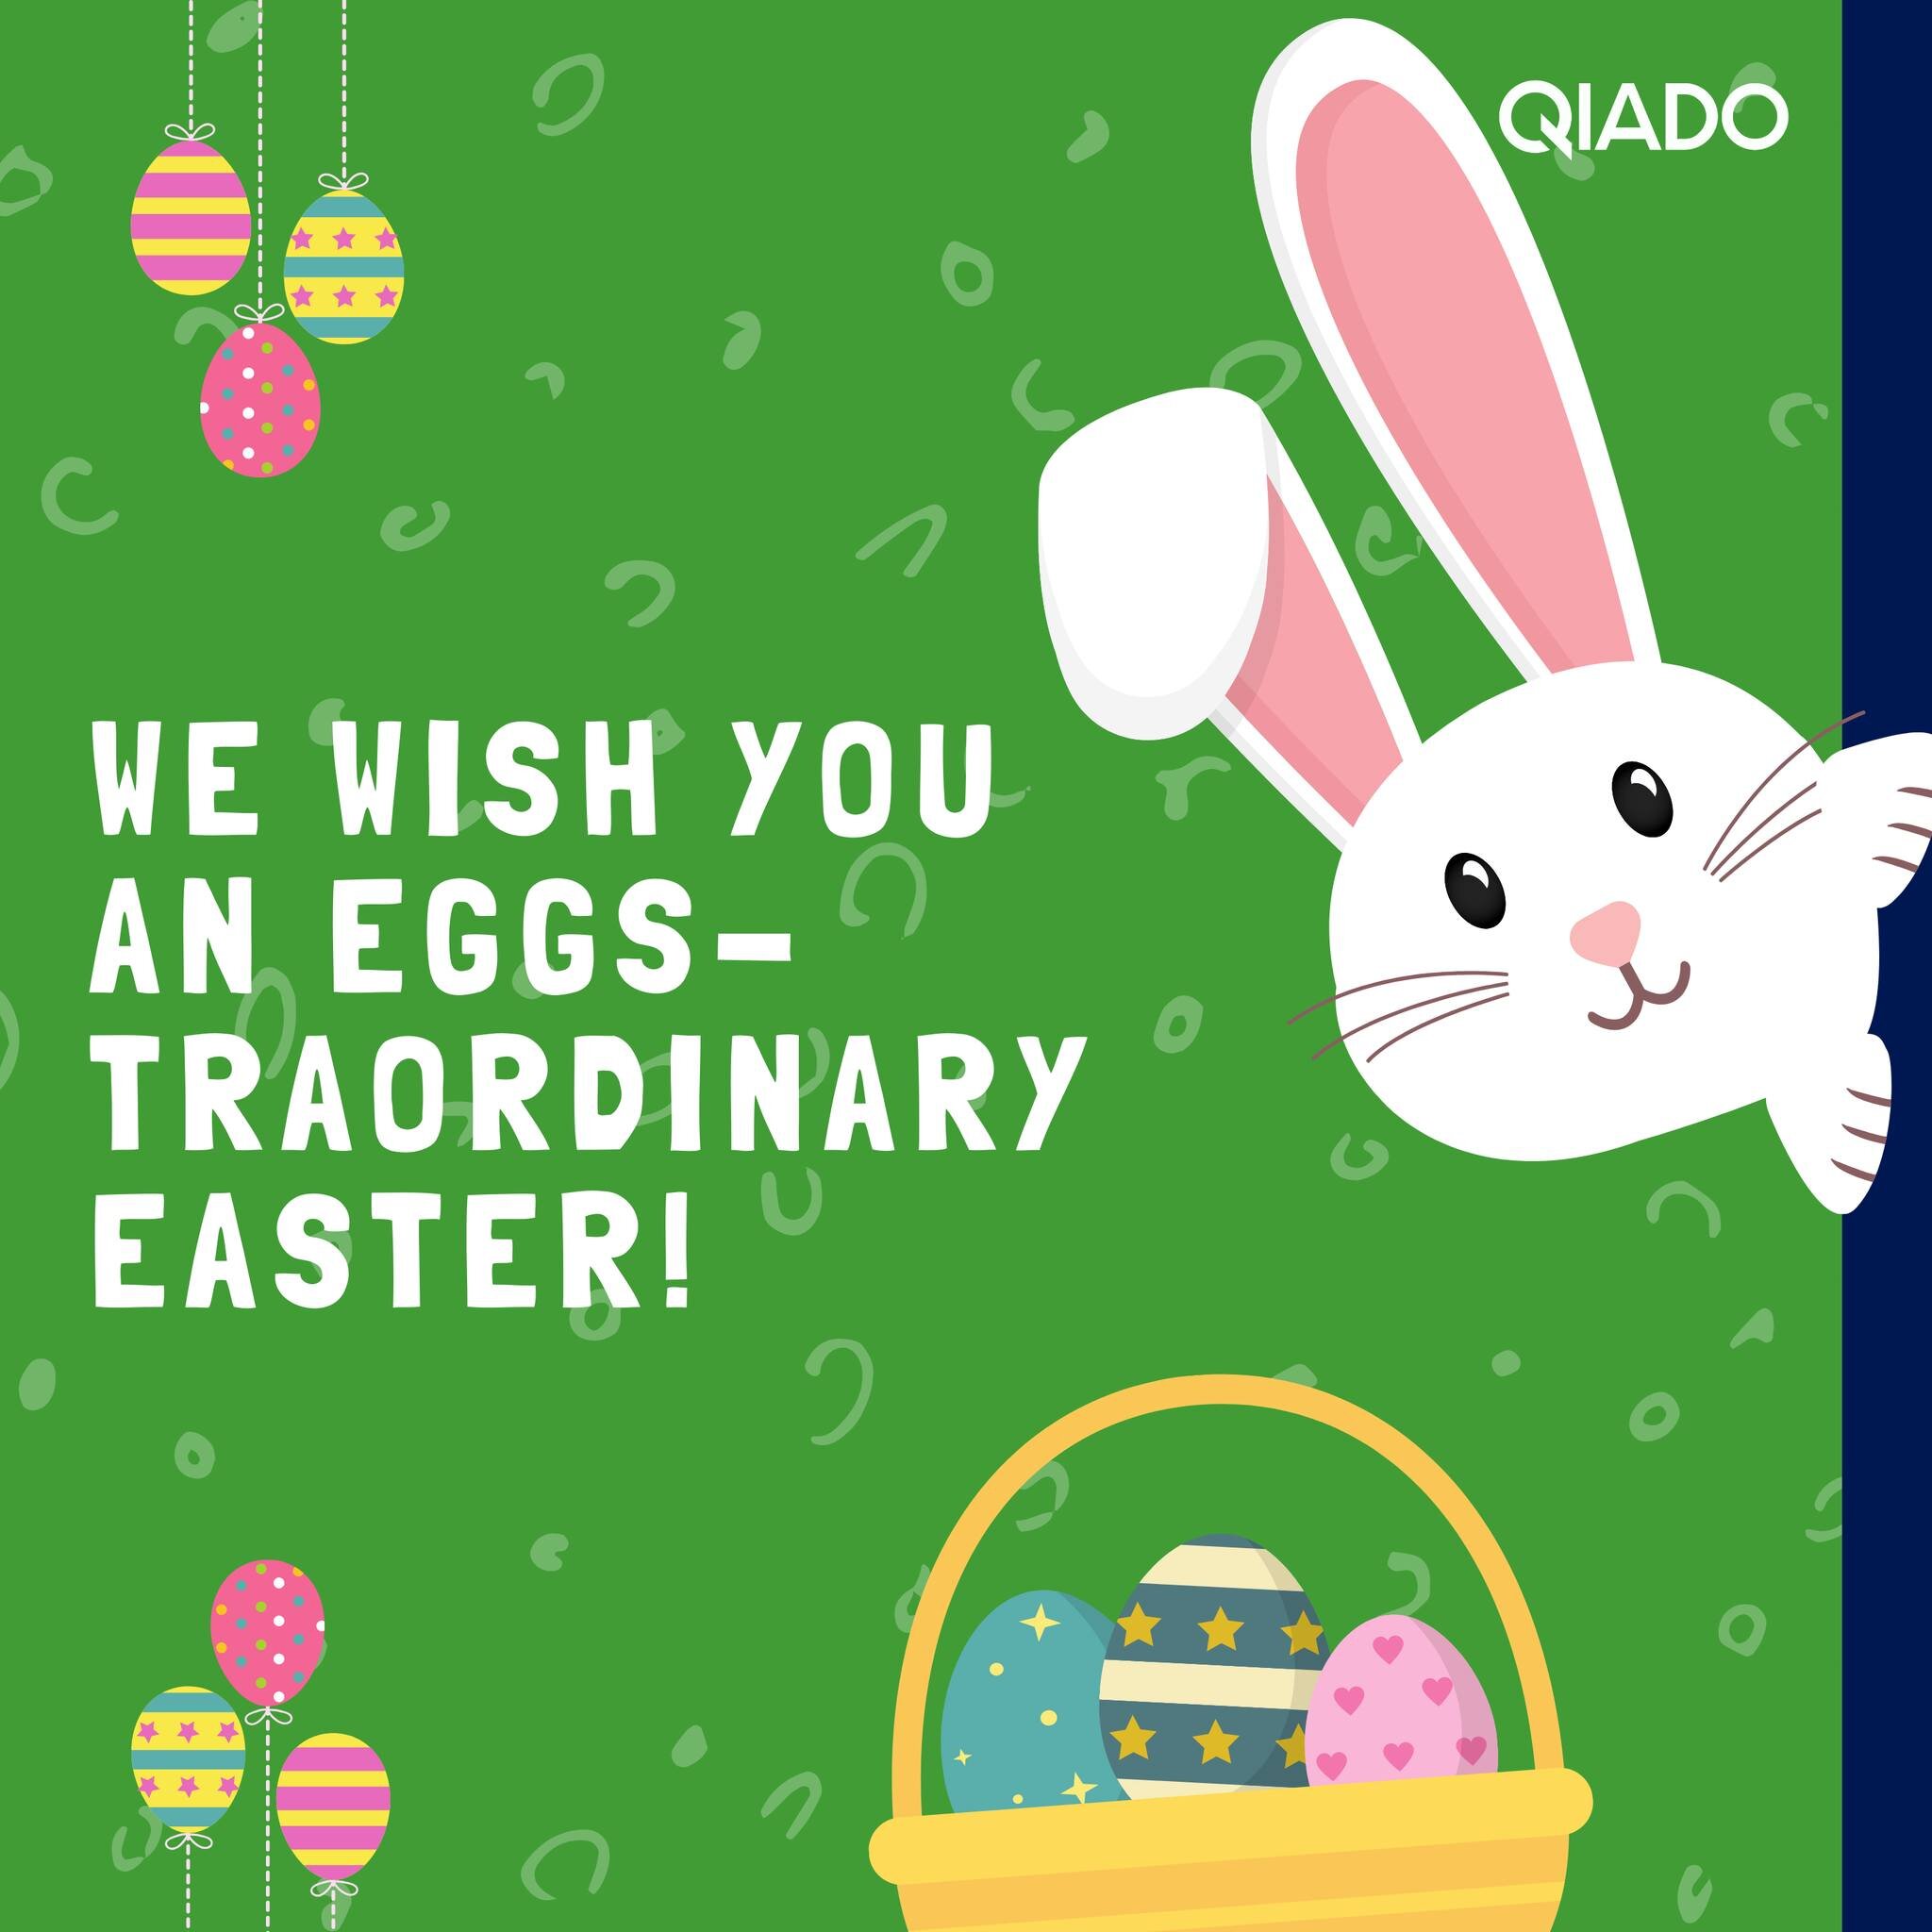 #HappyEaster May your day be egg-traordinary and filled with lots of chocolatey goodness! 🍫 🐰